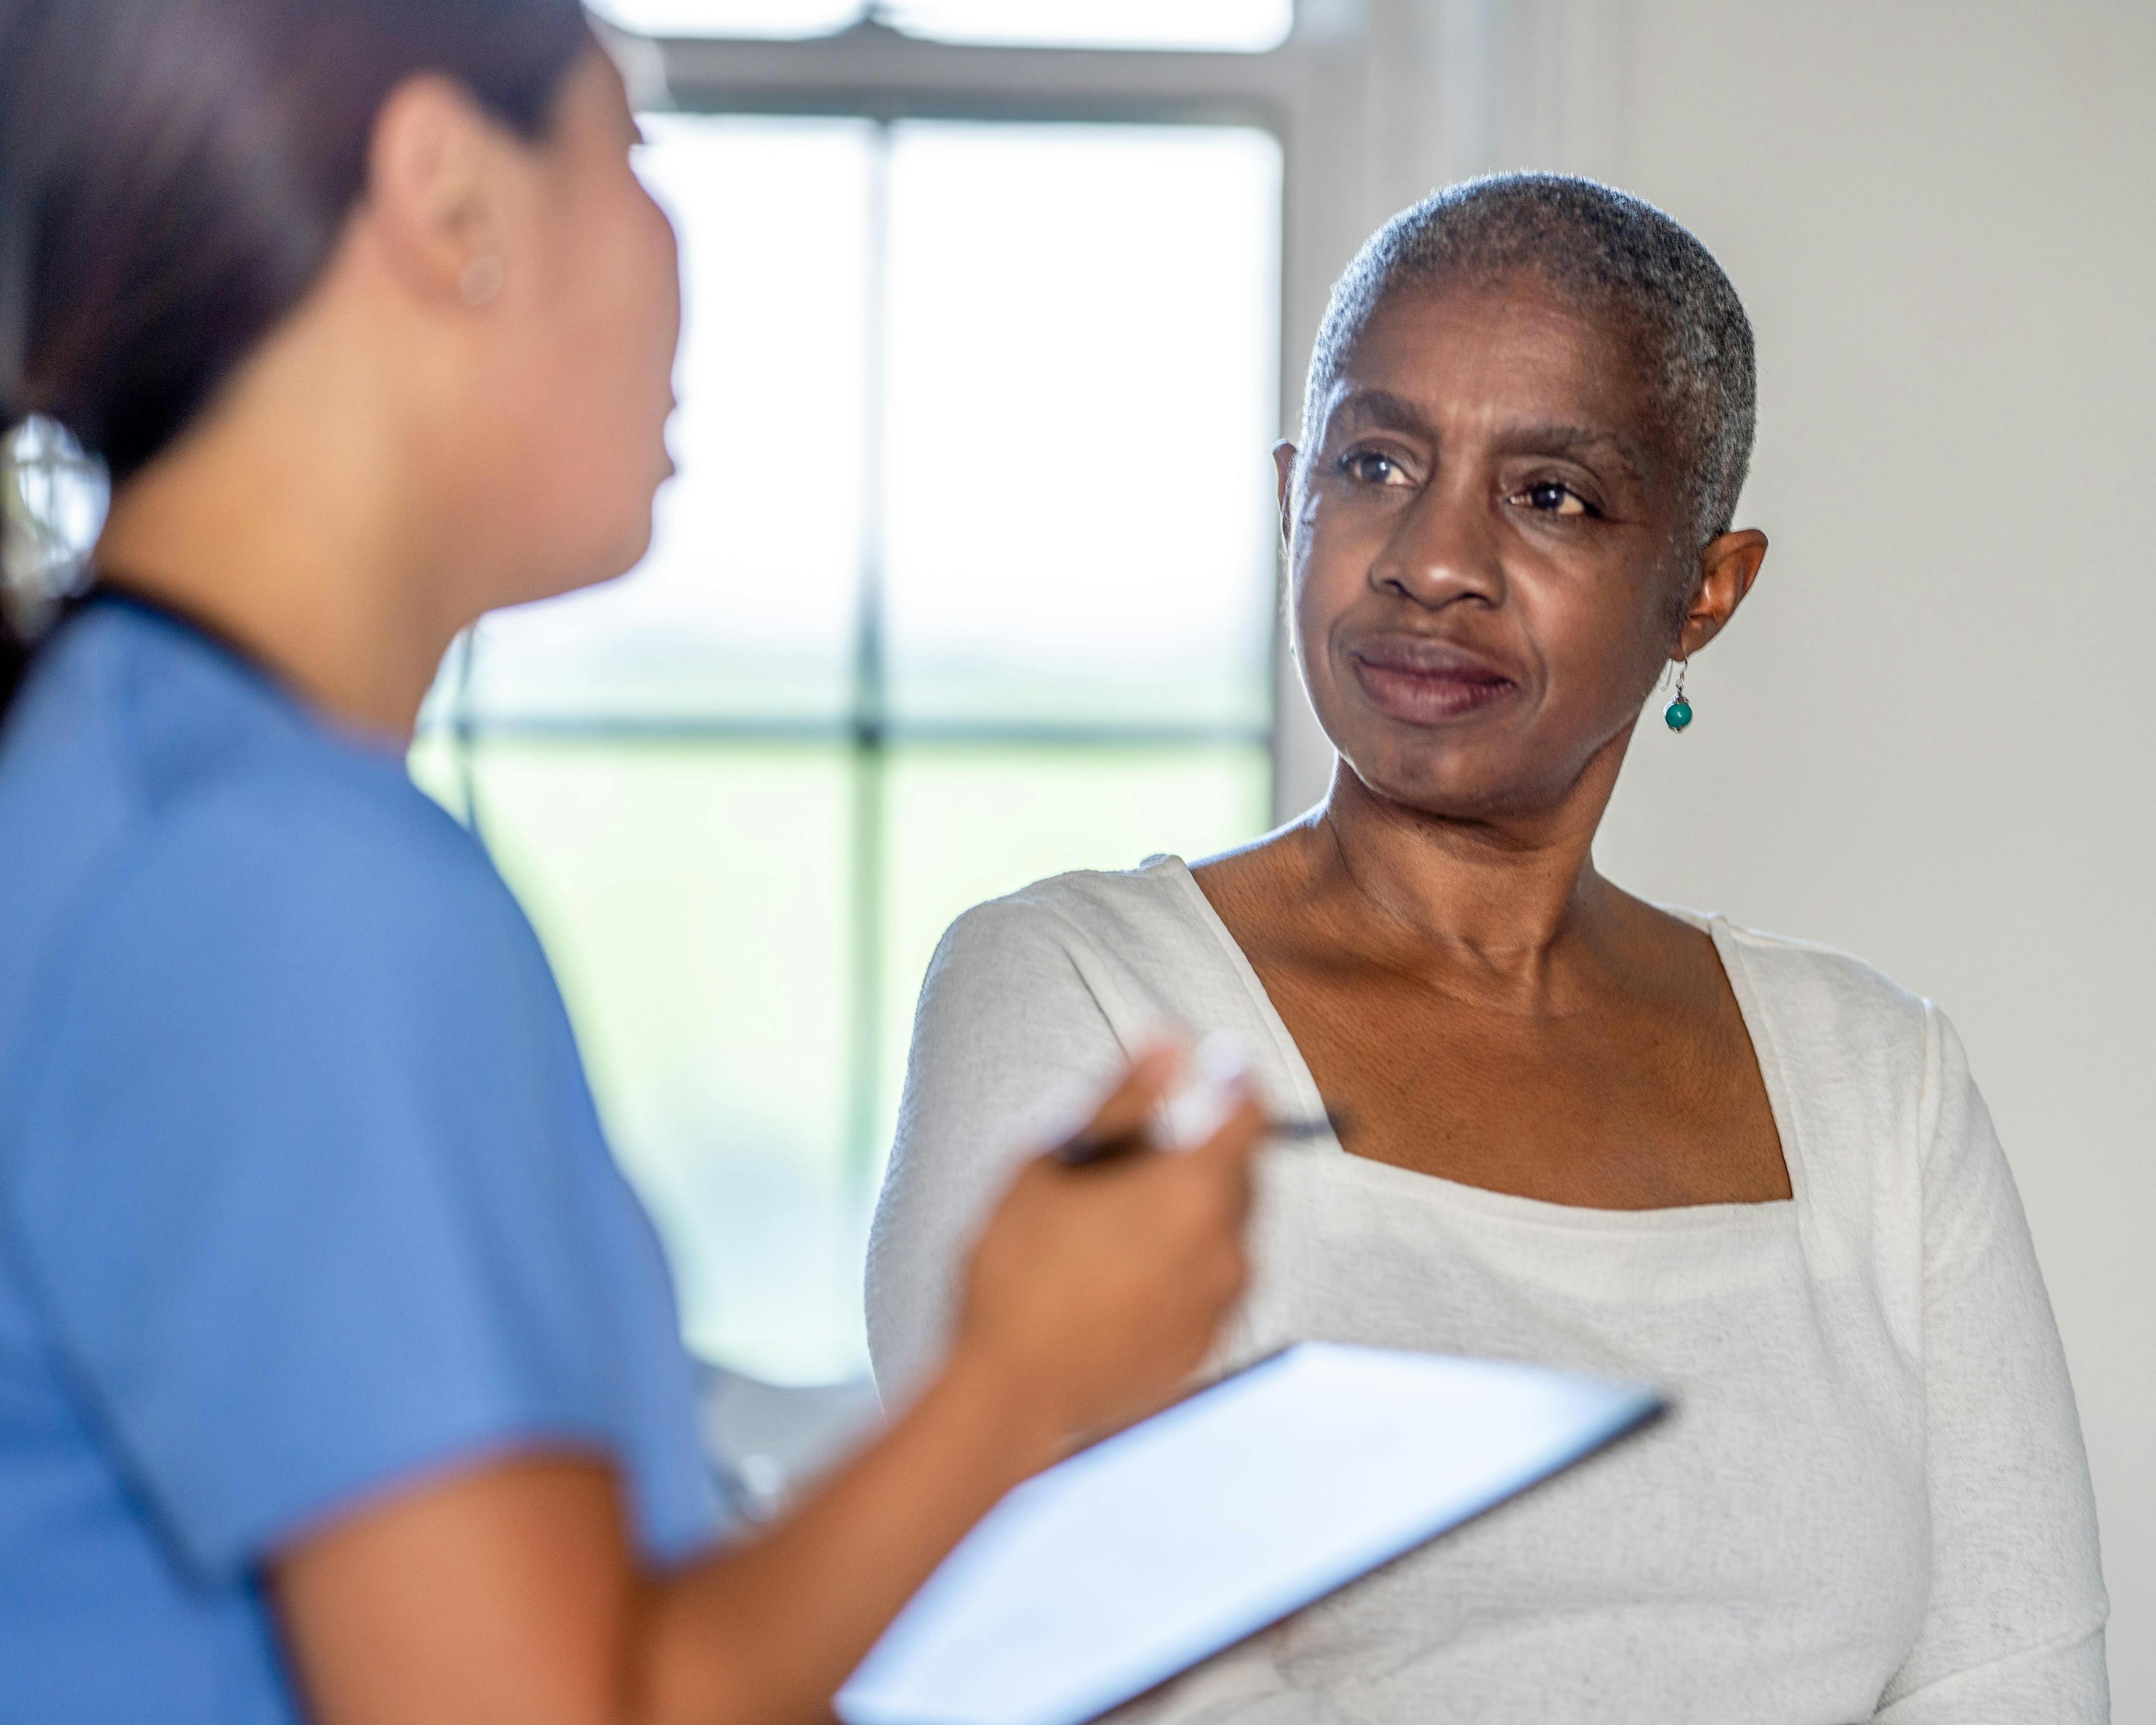 Oncology patient speaking with nurse